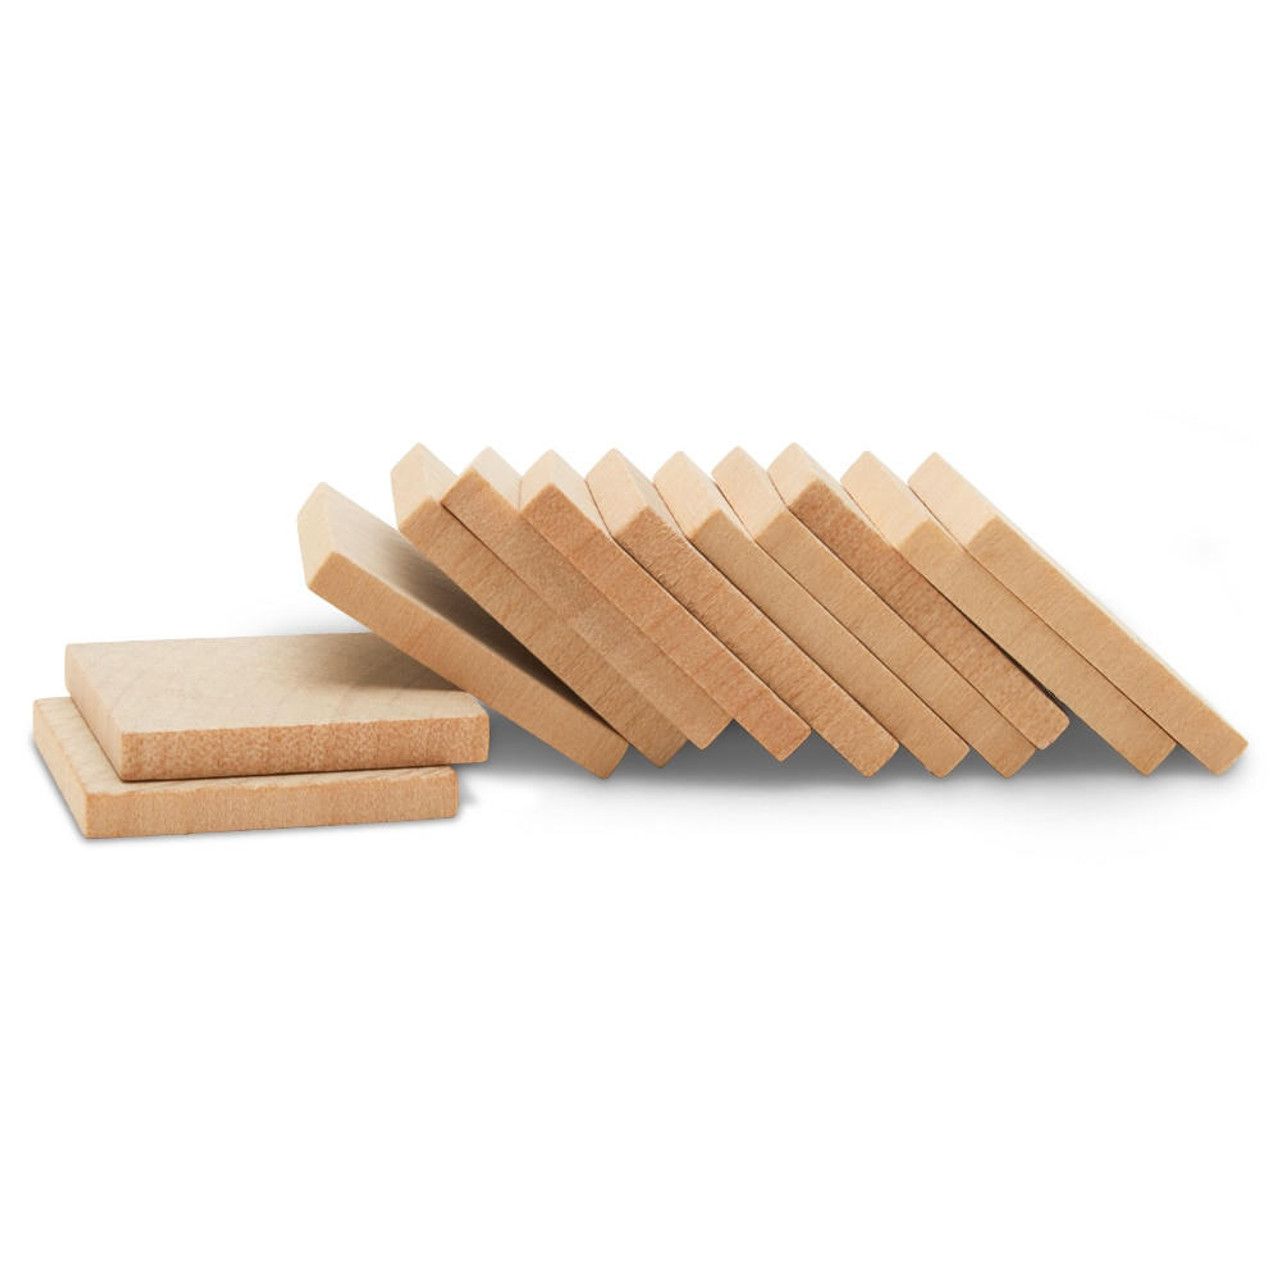 Wood Tiles, 2 x 2 Inch, Pack of 50 Blank Wood Squares for Crafts